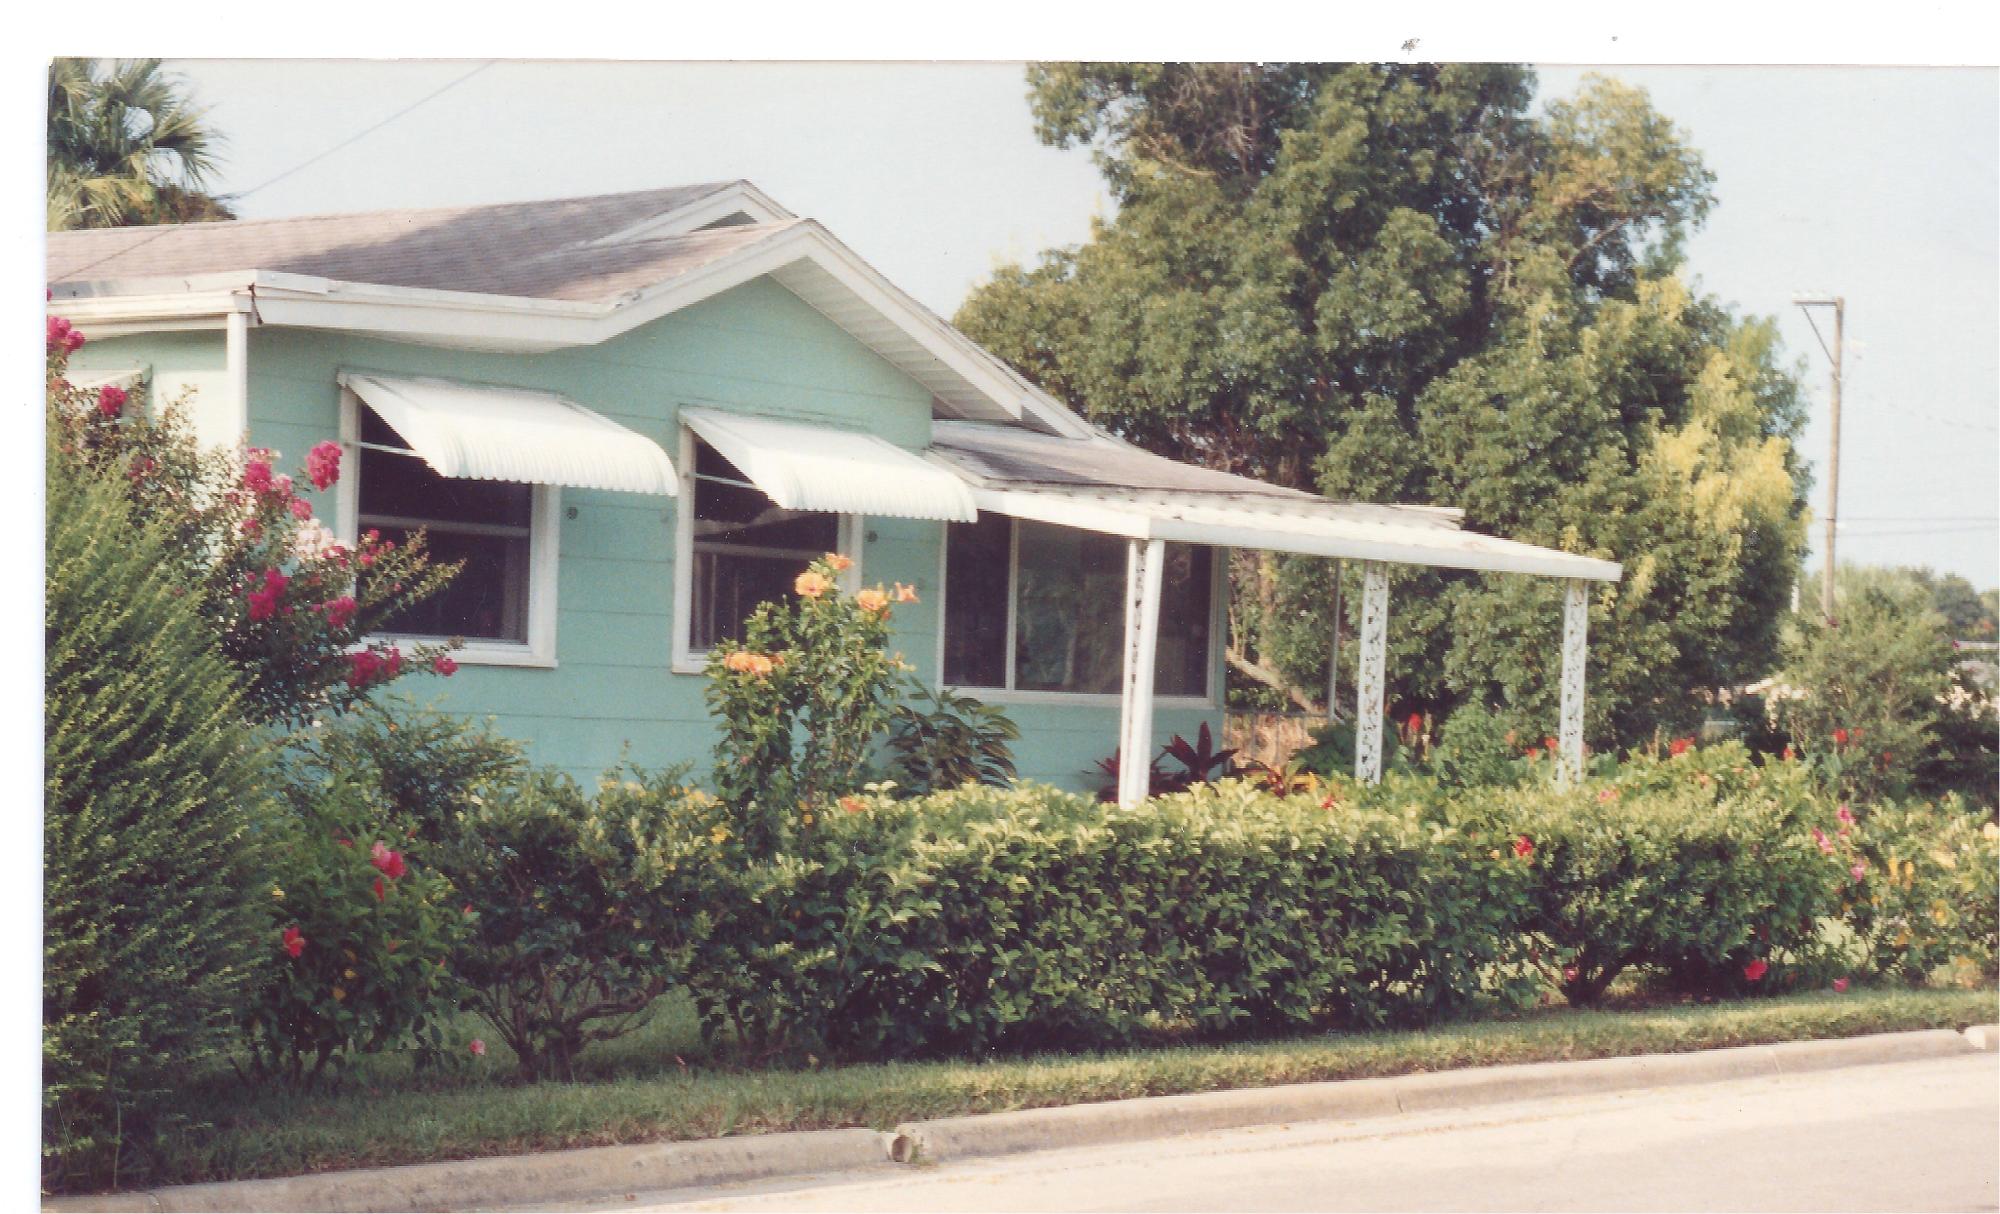 The Frame Vernacular home at 929 E. Bay St. was built in 1940 and purchased by educators William and Juanita Maxey four years later. It is owned by the West Orlando Christian Center, operated by the Church of God in Christ.